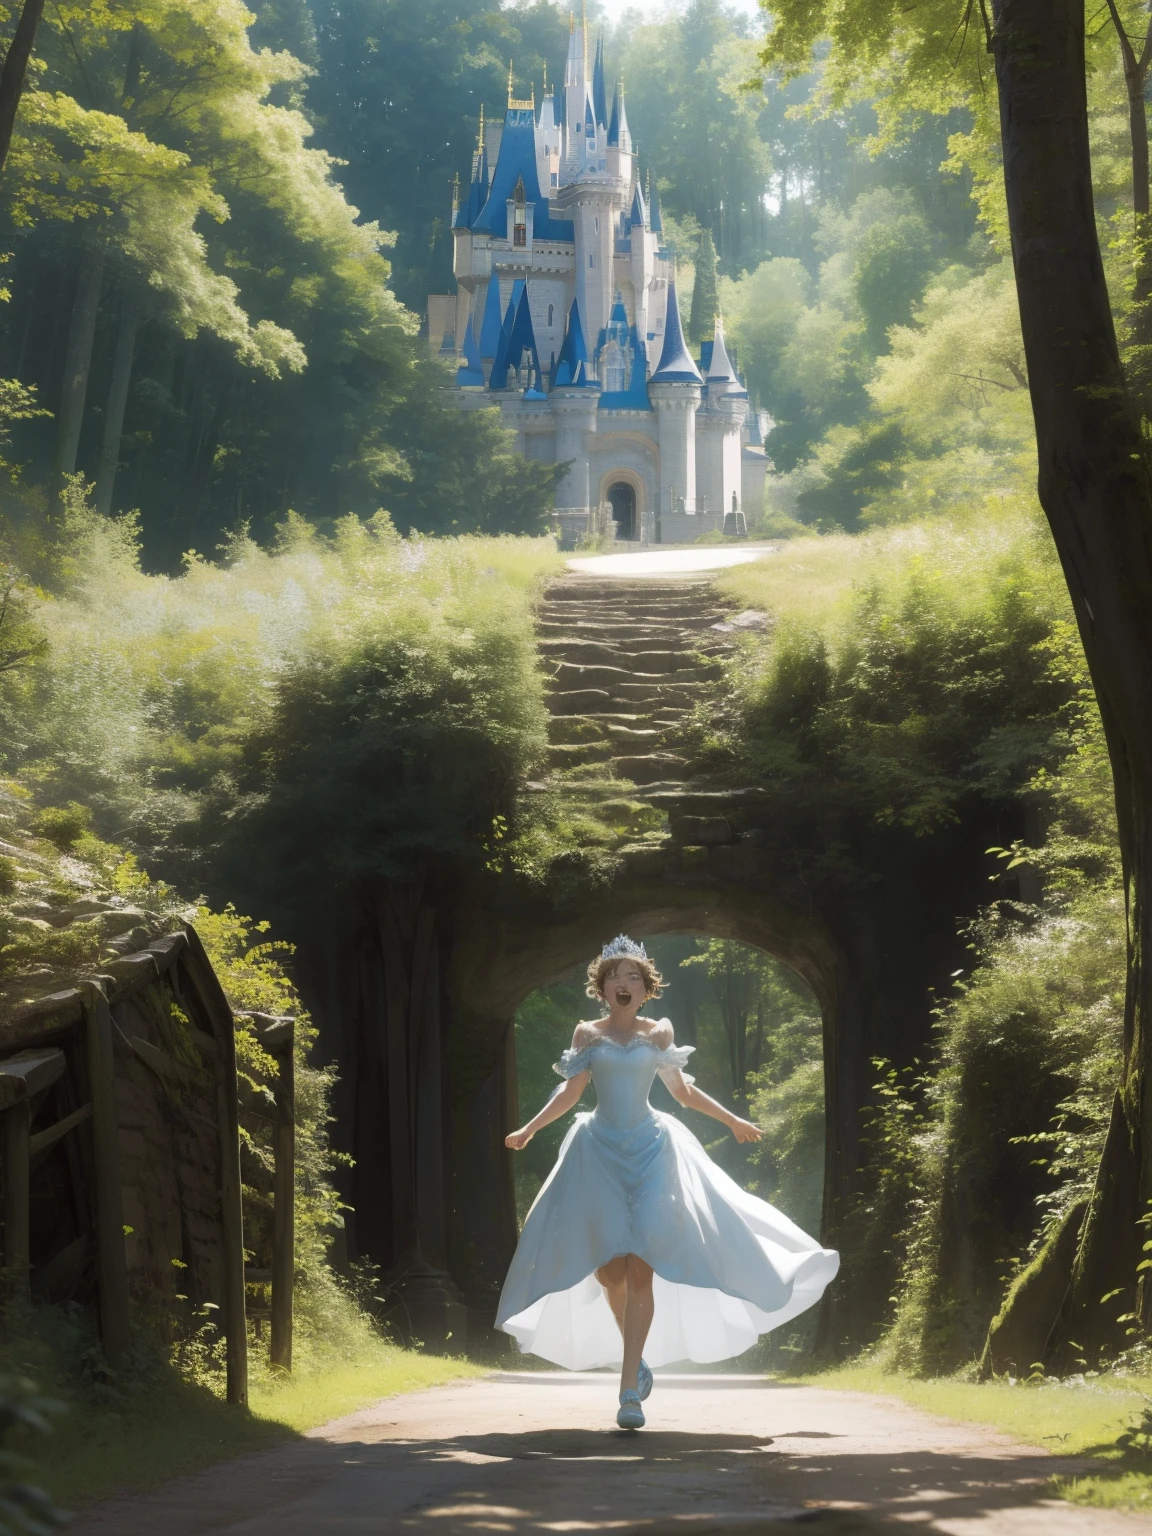 Cinderella comes running from the castle deep in the forest.、Sprinting through the forest、Running as if fleeing、A face full of fear、With a screaming face、Sweating profusely、Running away from the ugly prince、A road through the forest with many ruts、The depiction of the characters is small, prioritizing the scale of the forest.、tiara、white flared dress、Earrings、((Western fairy tale style))